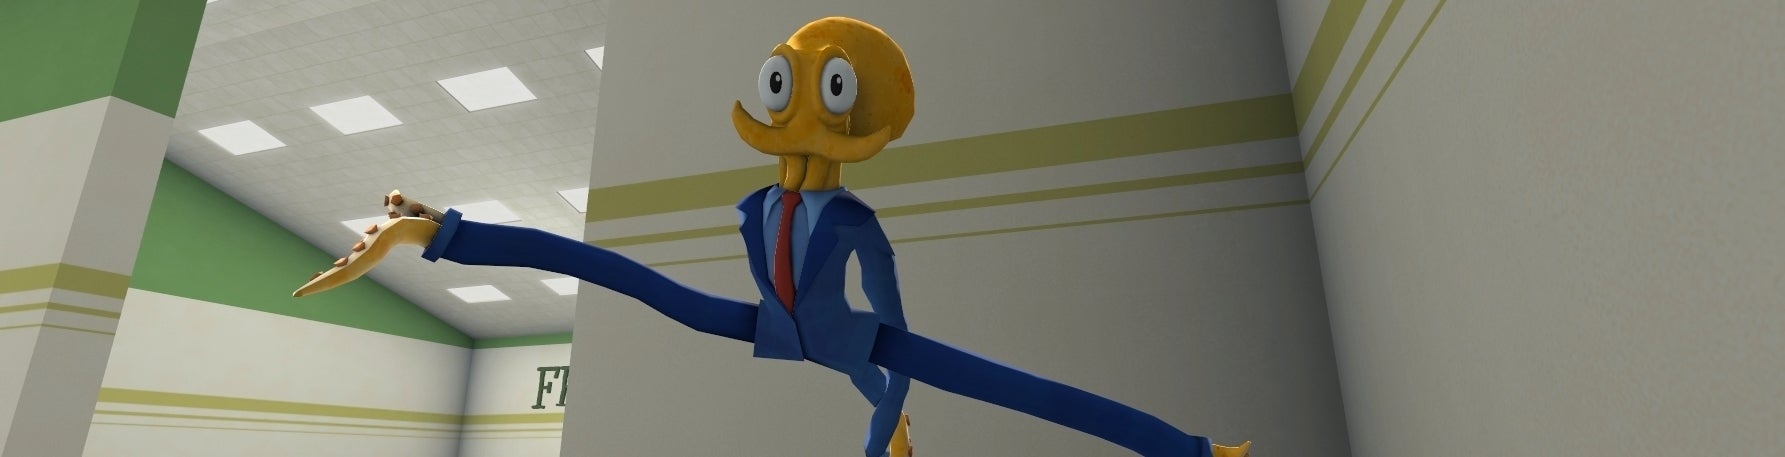 Image for Octodad: Dadliest Catch review